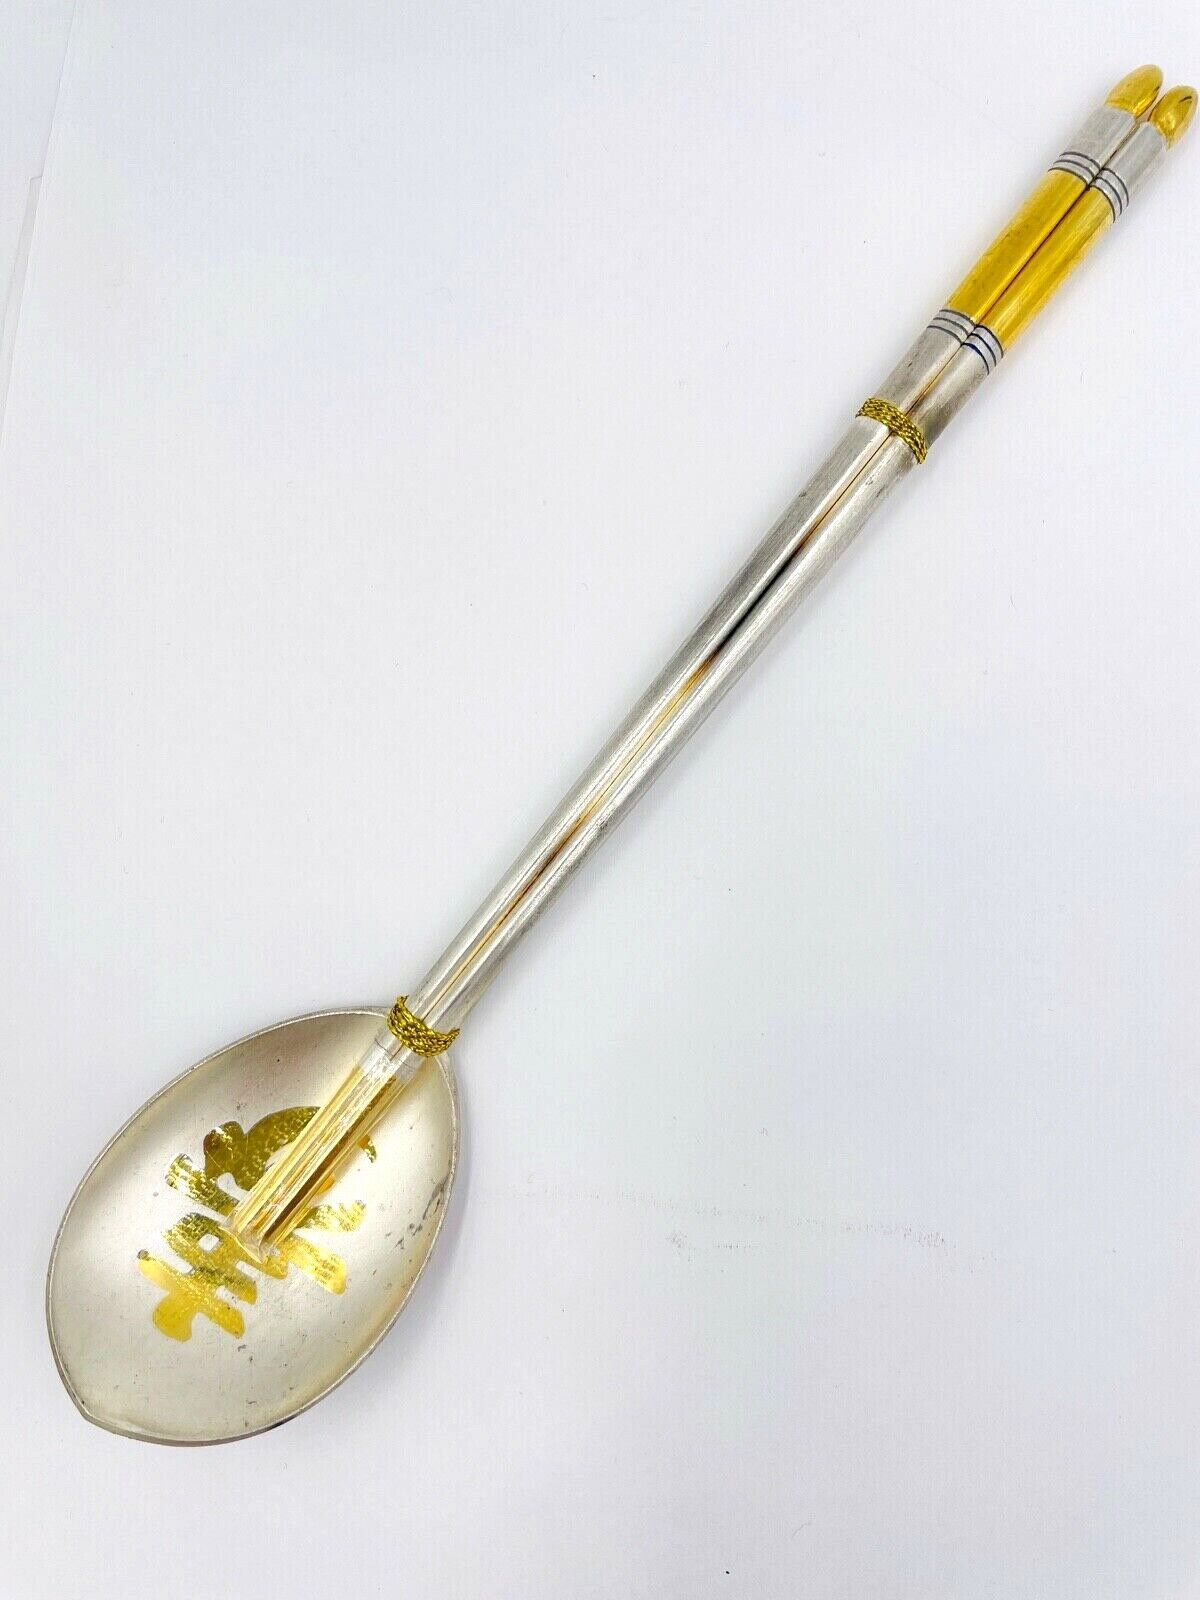 NOS Pure Silver .999 Chop Sticks and spoon set gold plated Korean